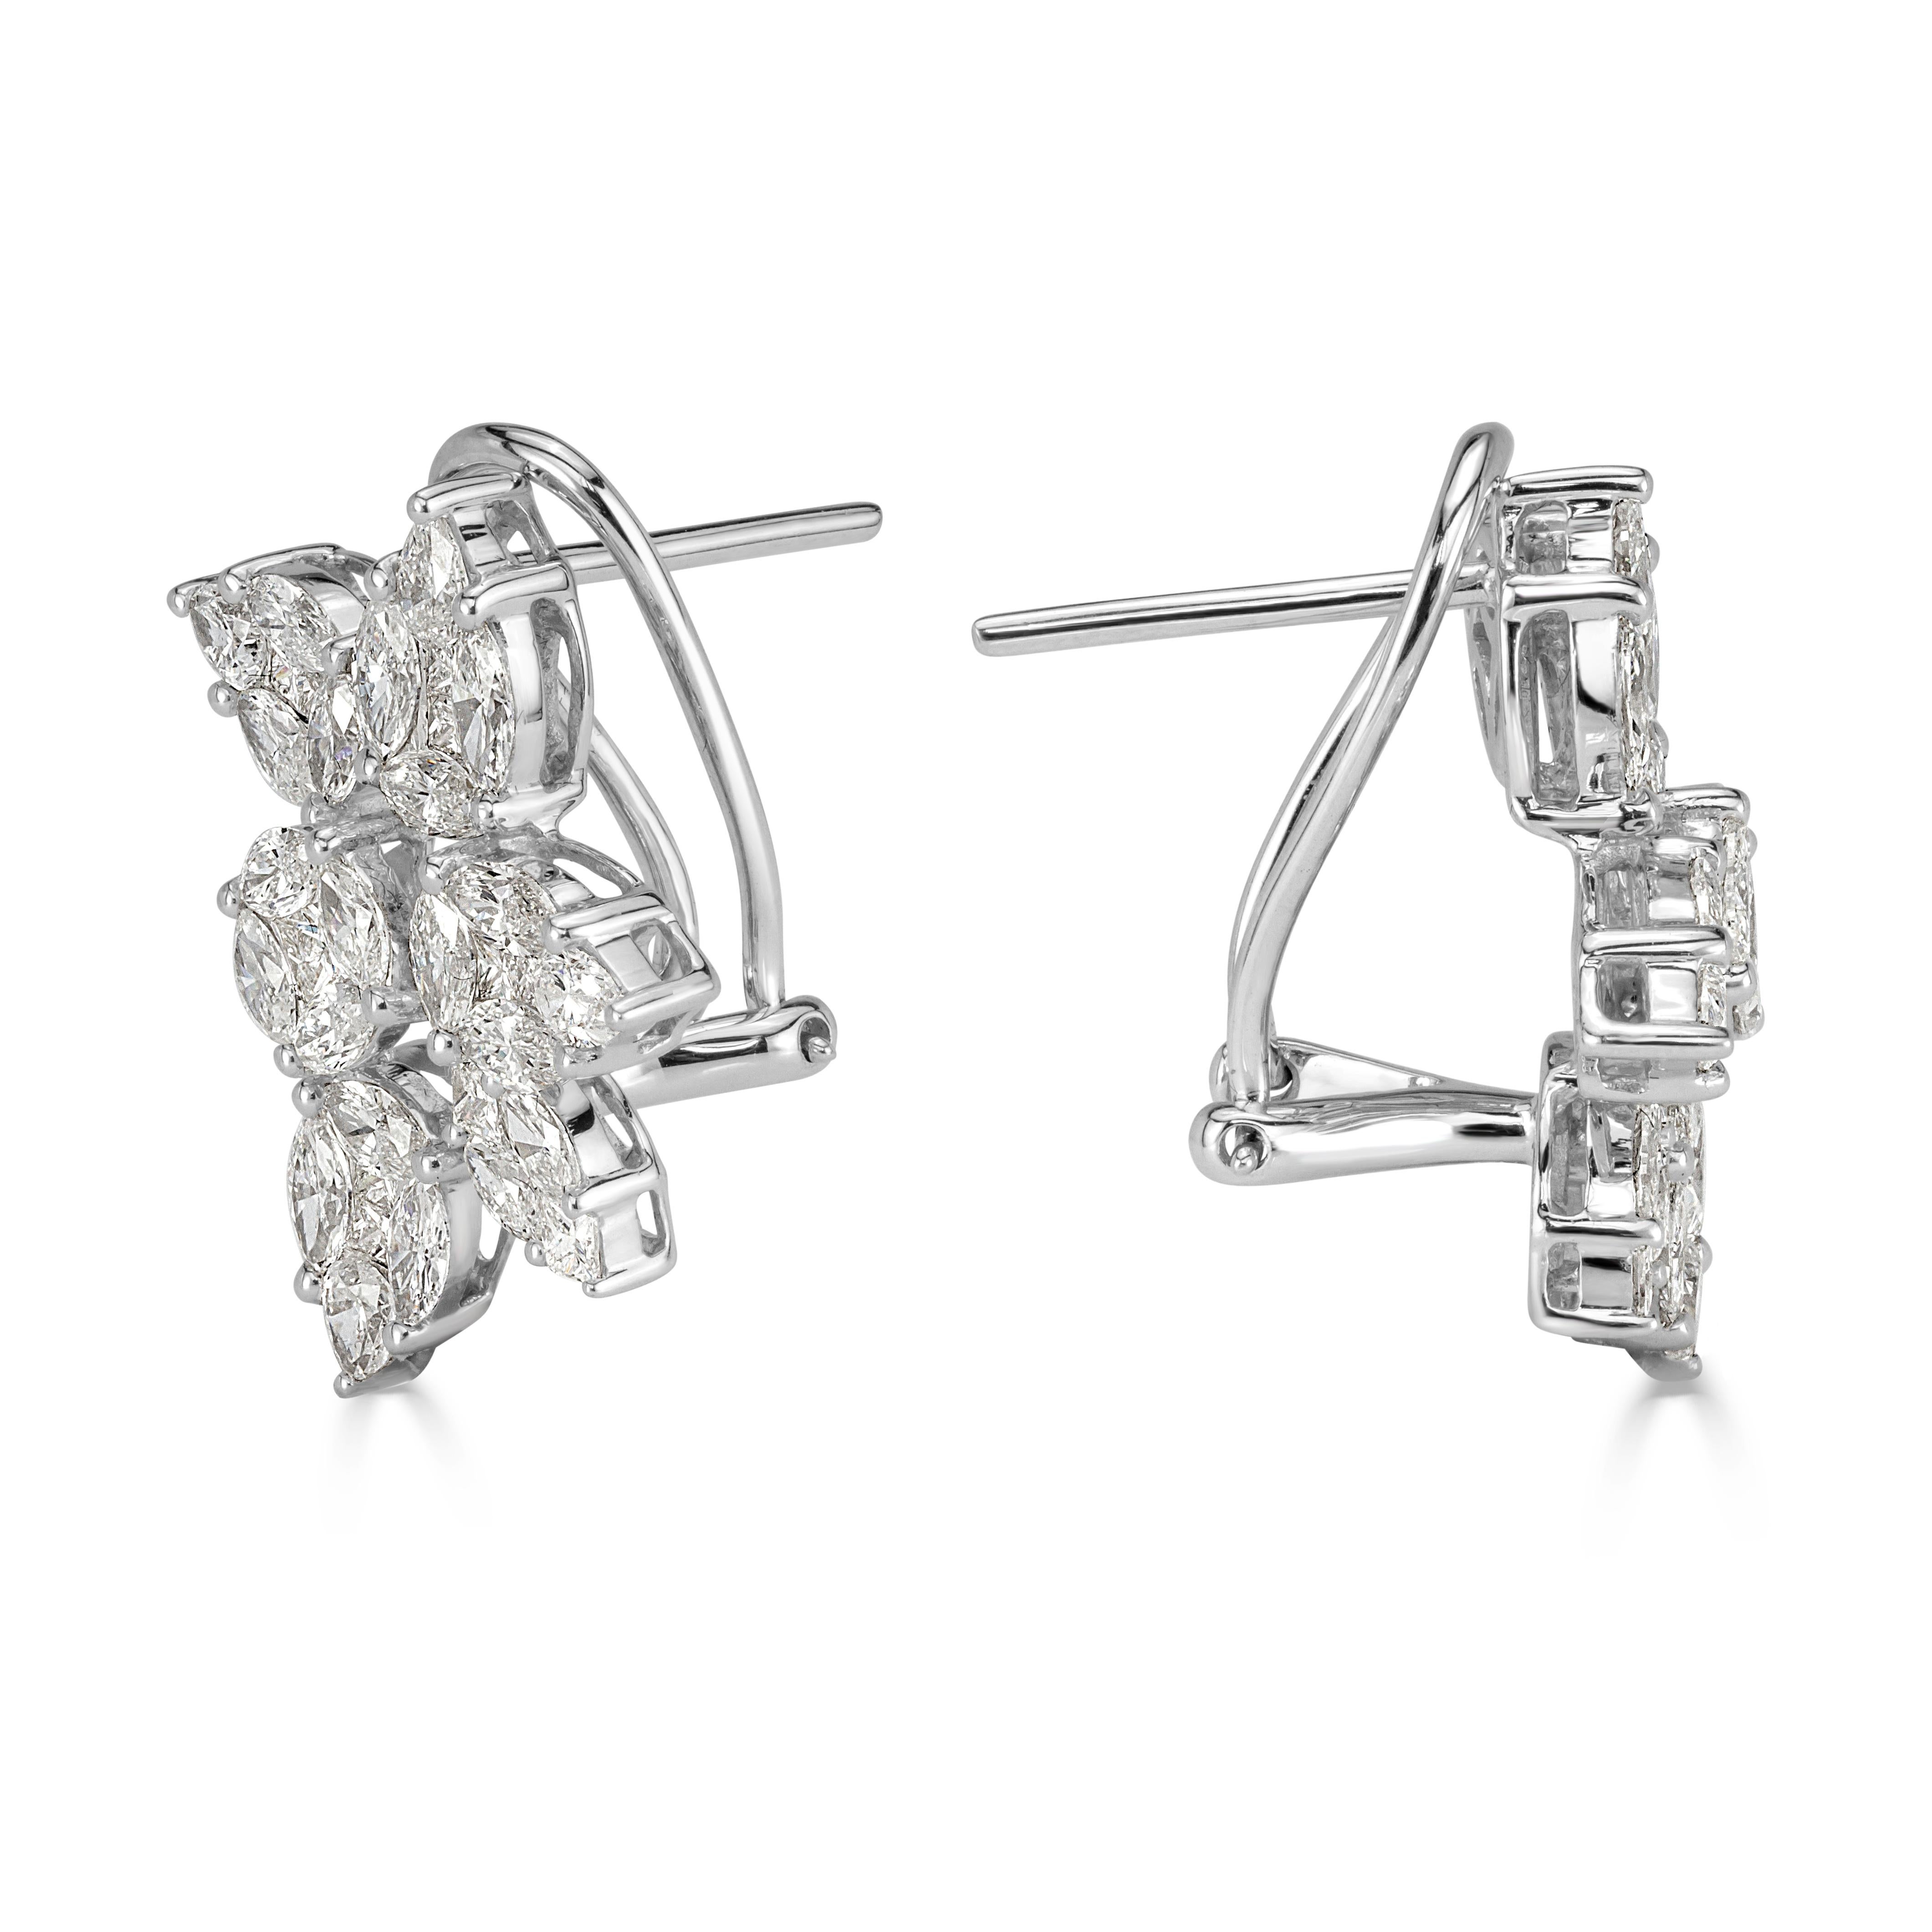 This truly elegant and stylish pair of diamond cluster earrings showcases an exquisite floral design of marquise, princess cut and pear shaped diamonds set in 18k white gold. The diamonds are graded at G-H in color, VS1-VS2 in clarity.